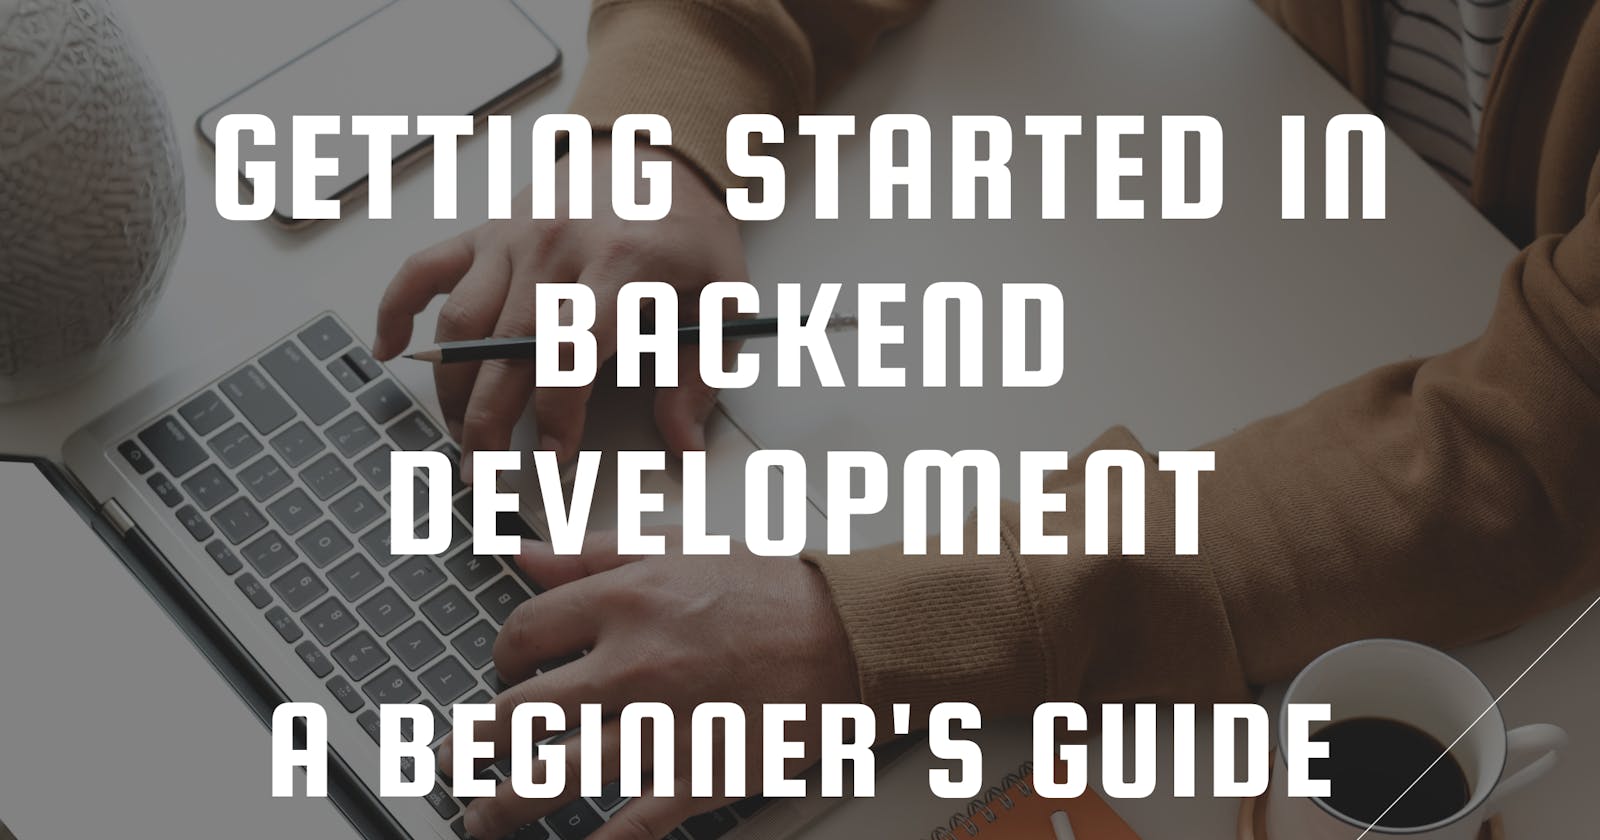 Getting started in Backend Development: A beginner's guide